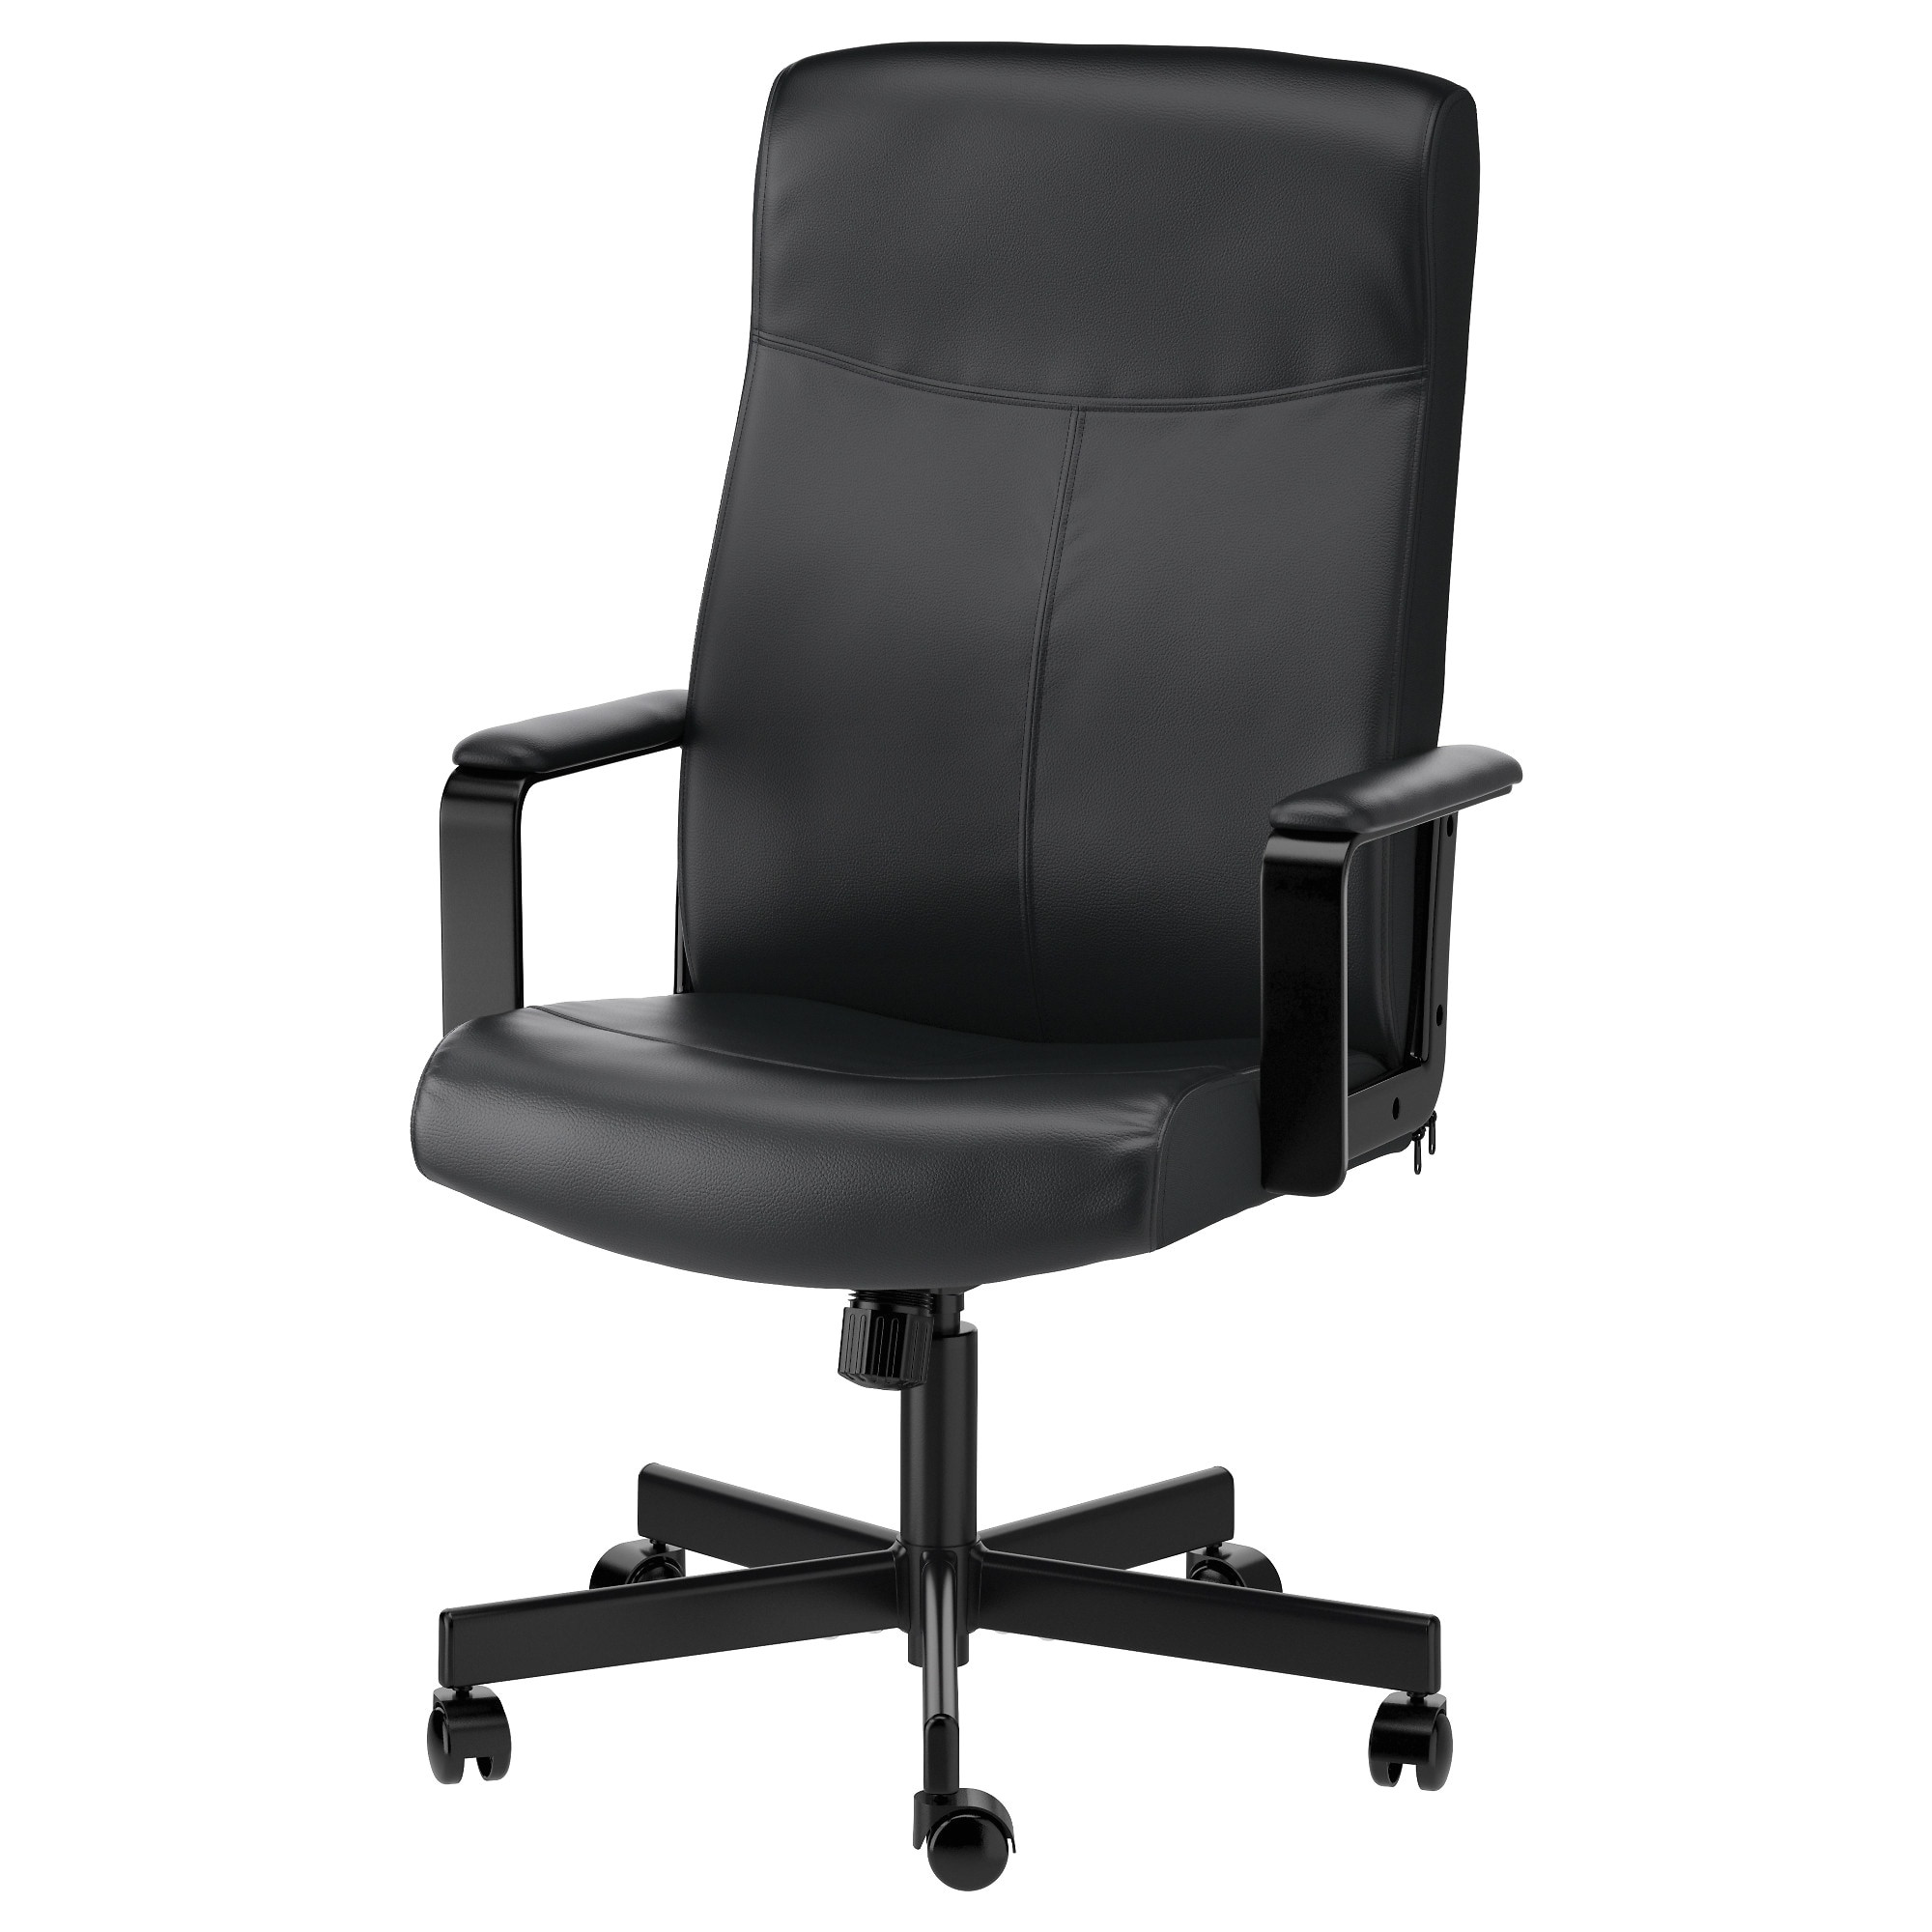 Desk Chair with Leg Rest Desk Chairs Office Seating Ikea